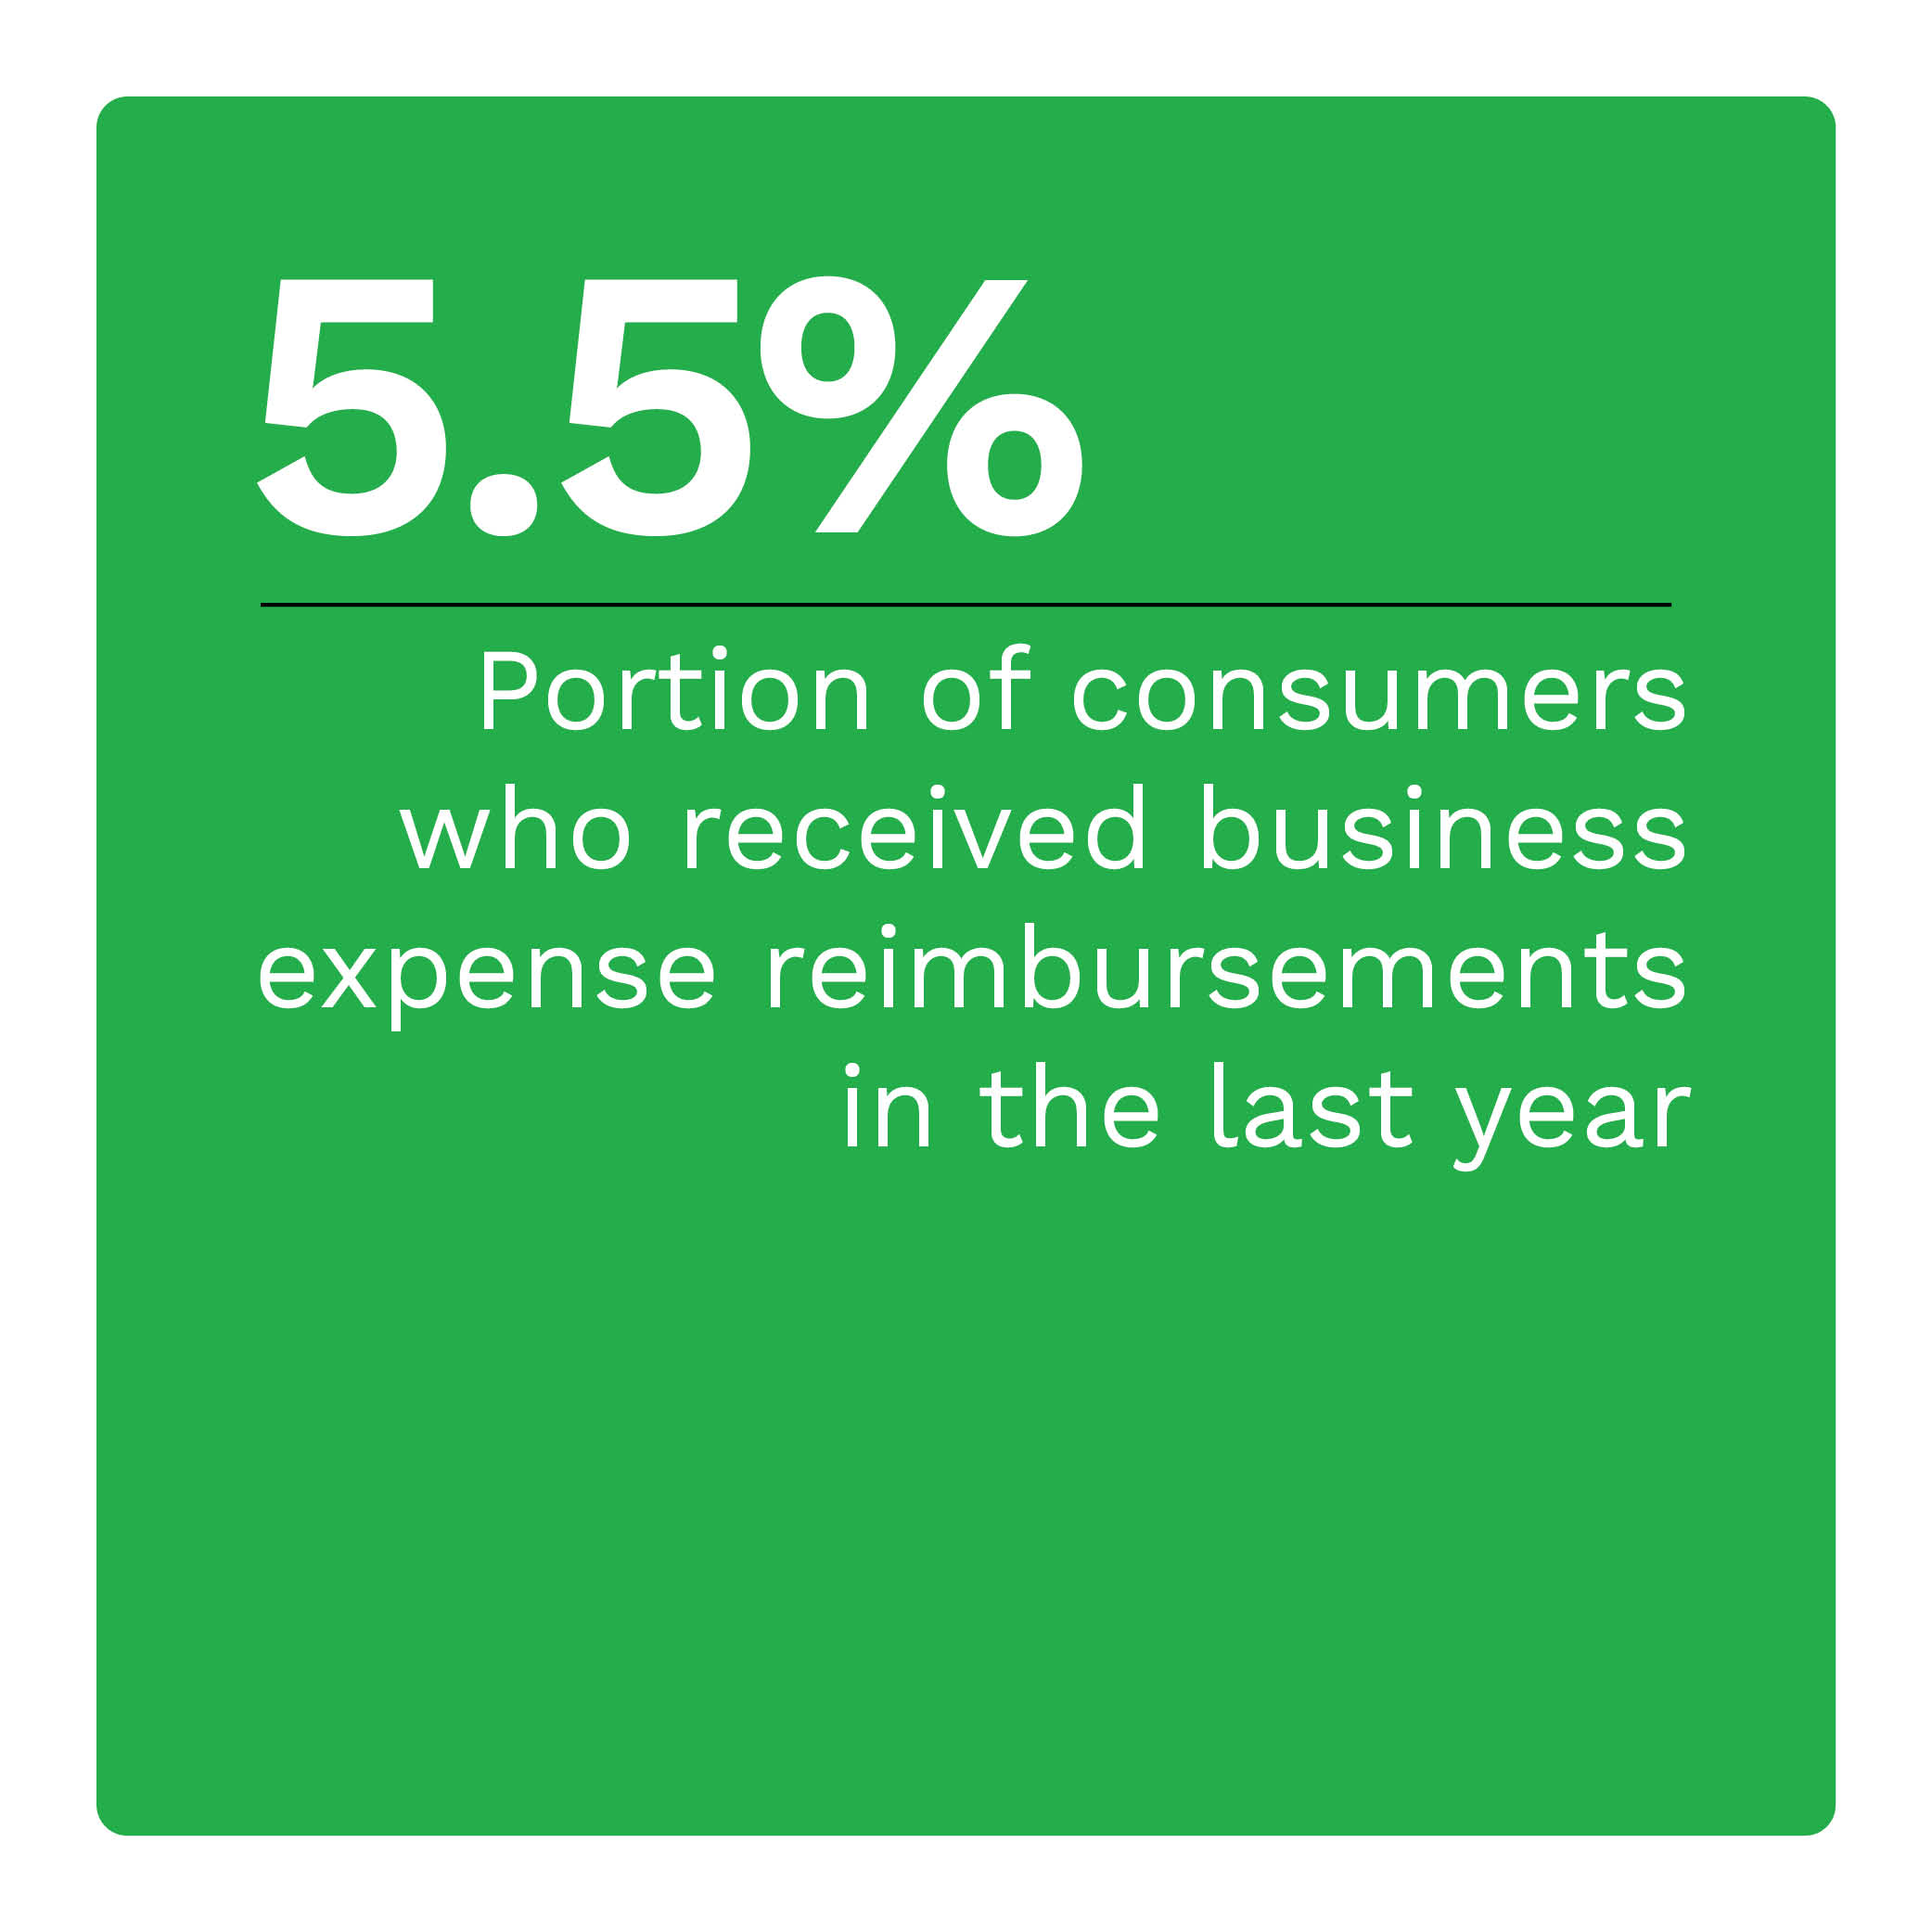 5.5%: Portion of consumers who received business expense reimbursements in the last year